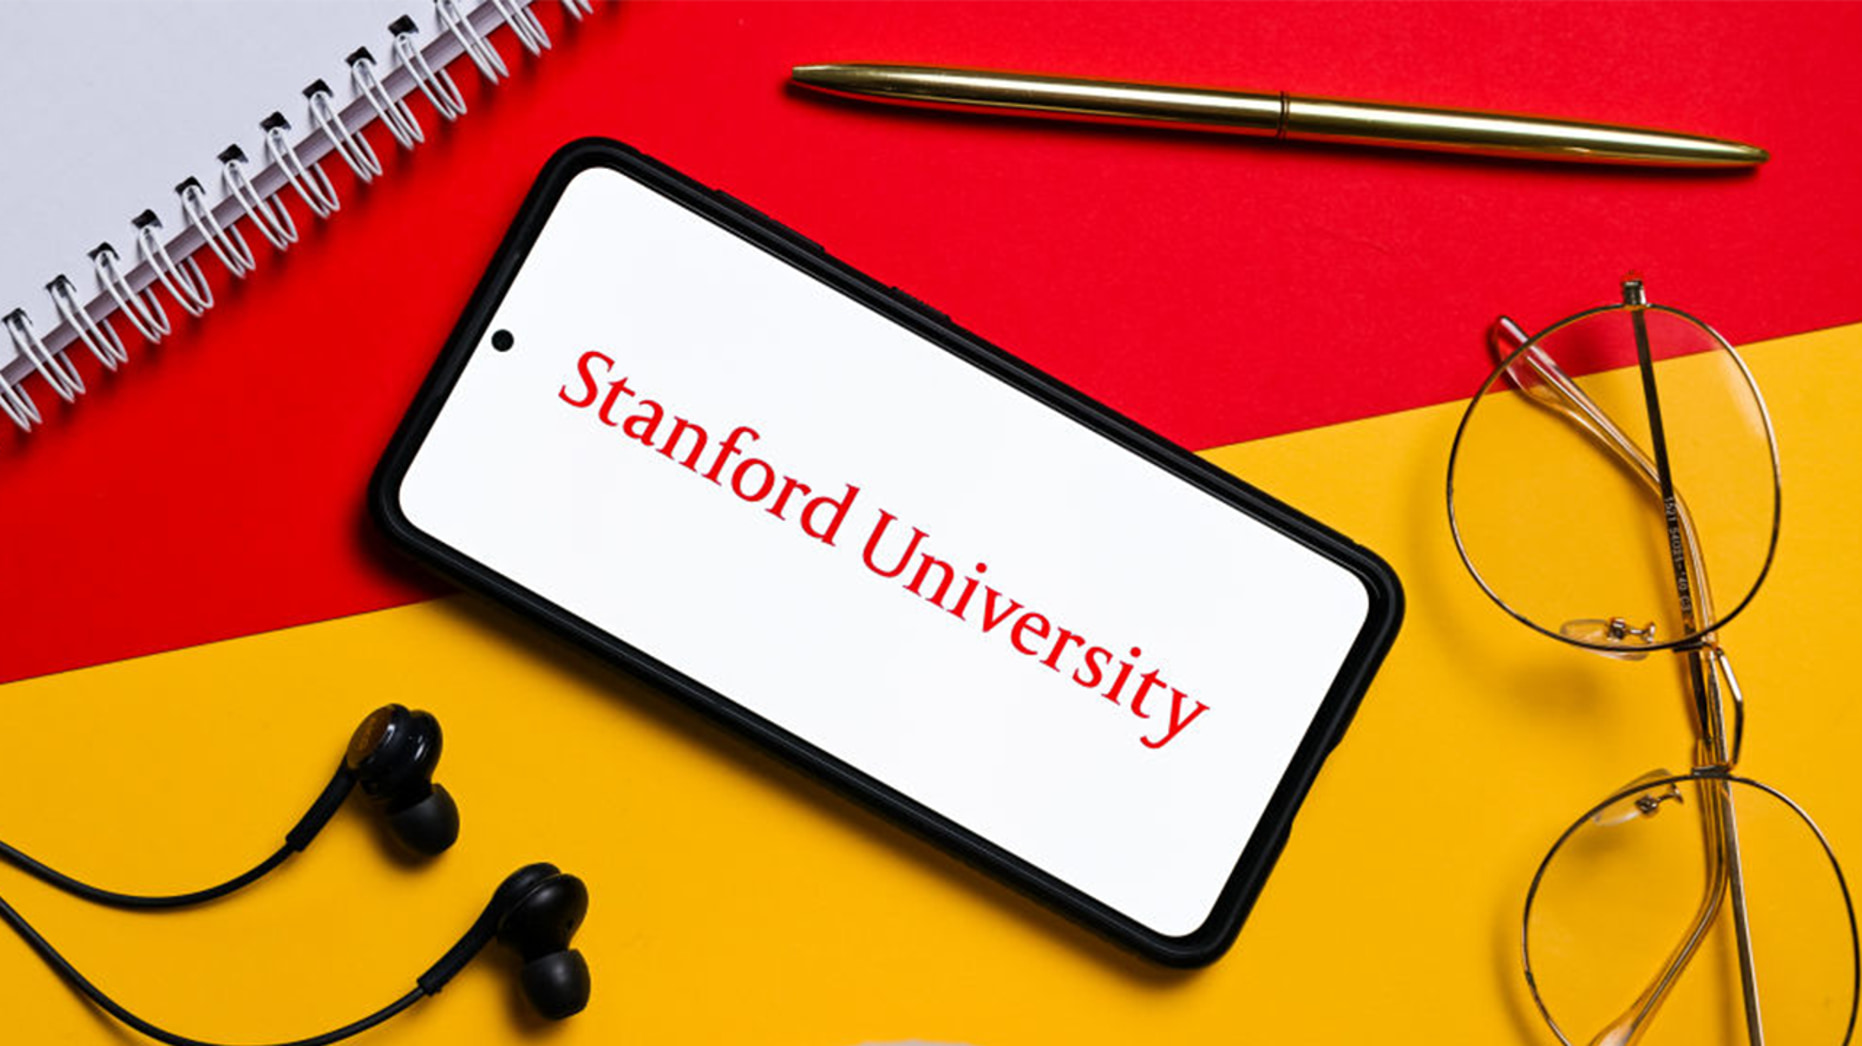 Stanford Releases Guide to Eliminate 'Harmful' Language